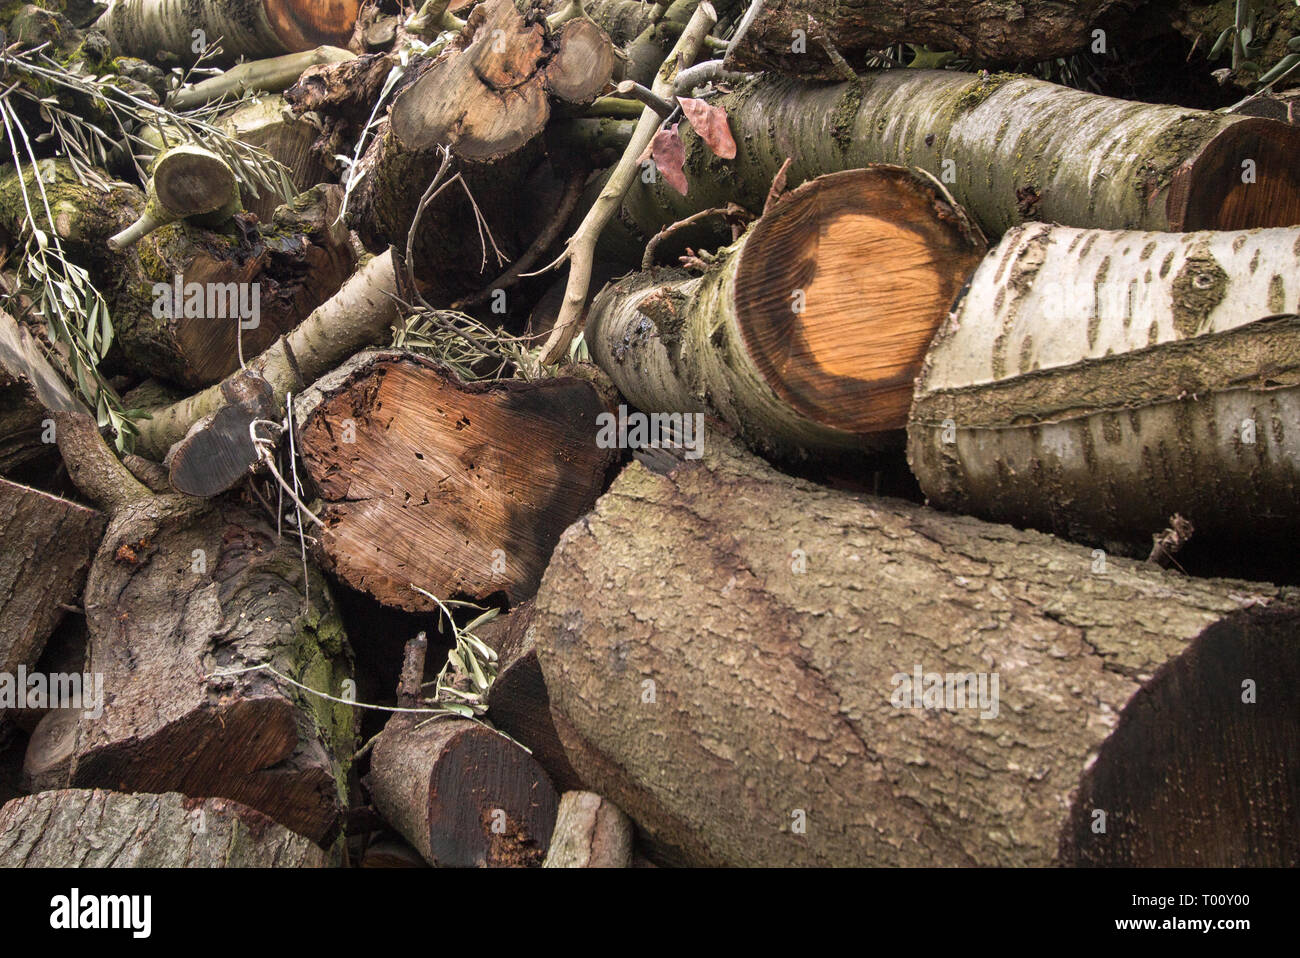 Wood as biofuel is still popular for public buildings like historical  Turkish Baths (hamam). This pile was in front of one of these baths in  Iznik, Bu Stock Photo - Alamy